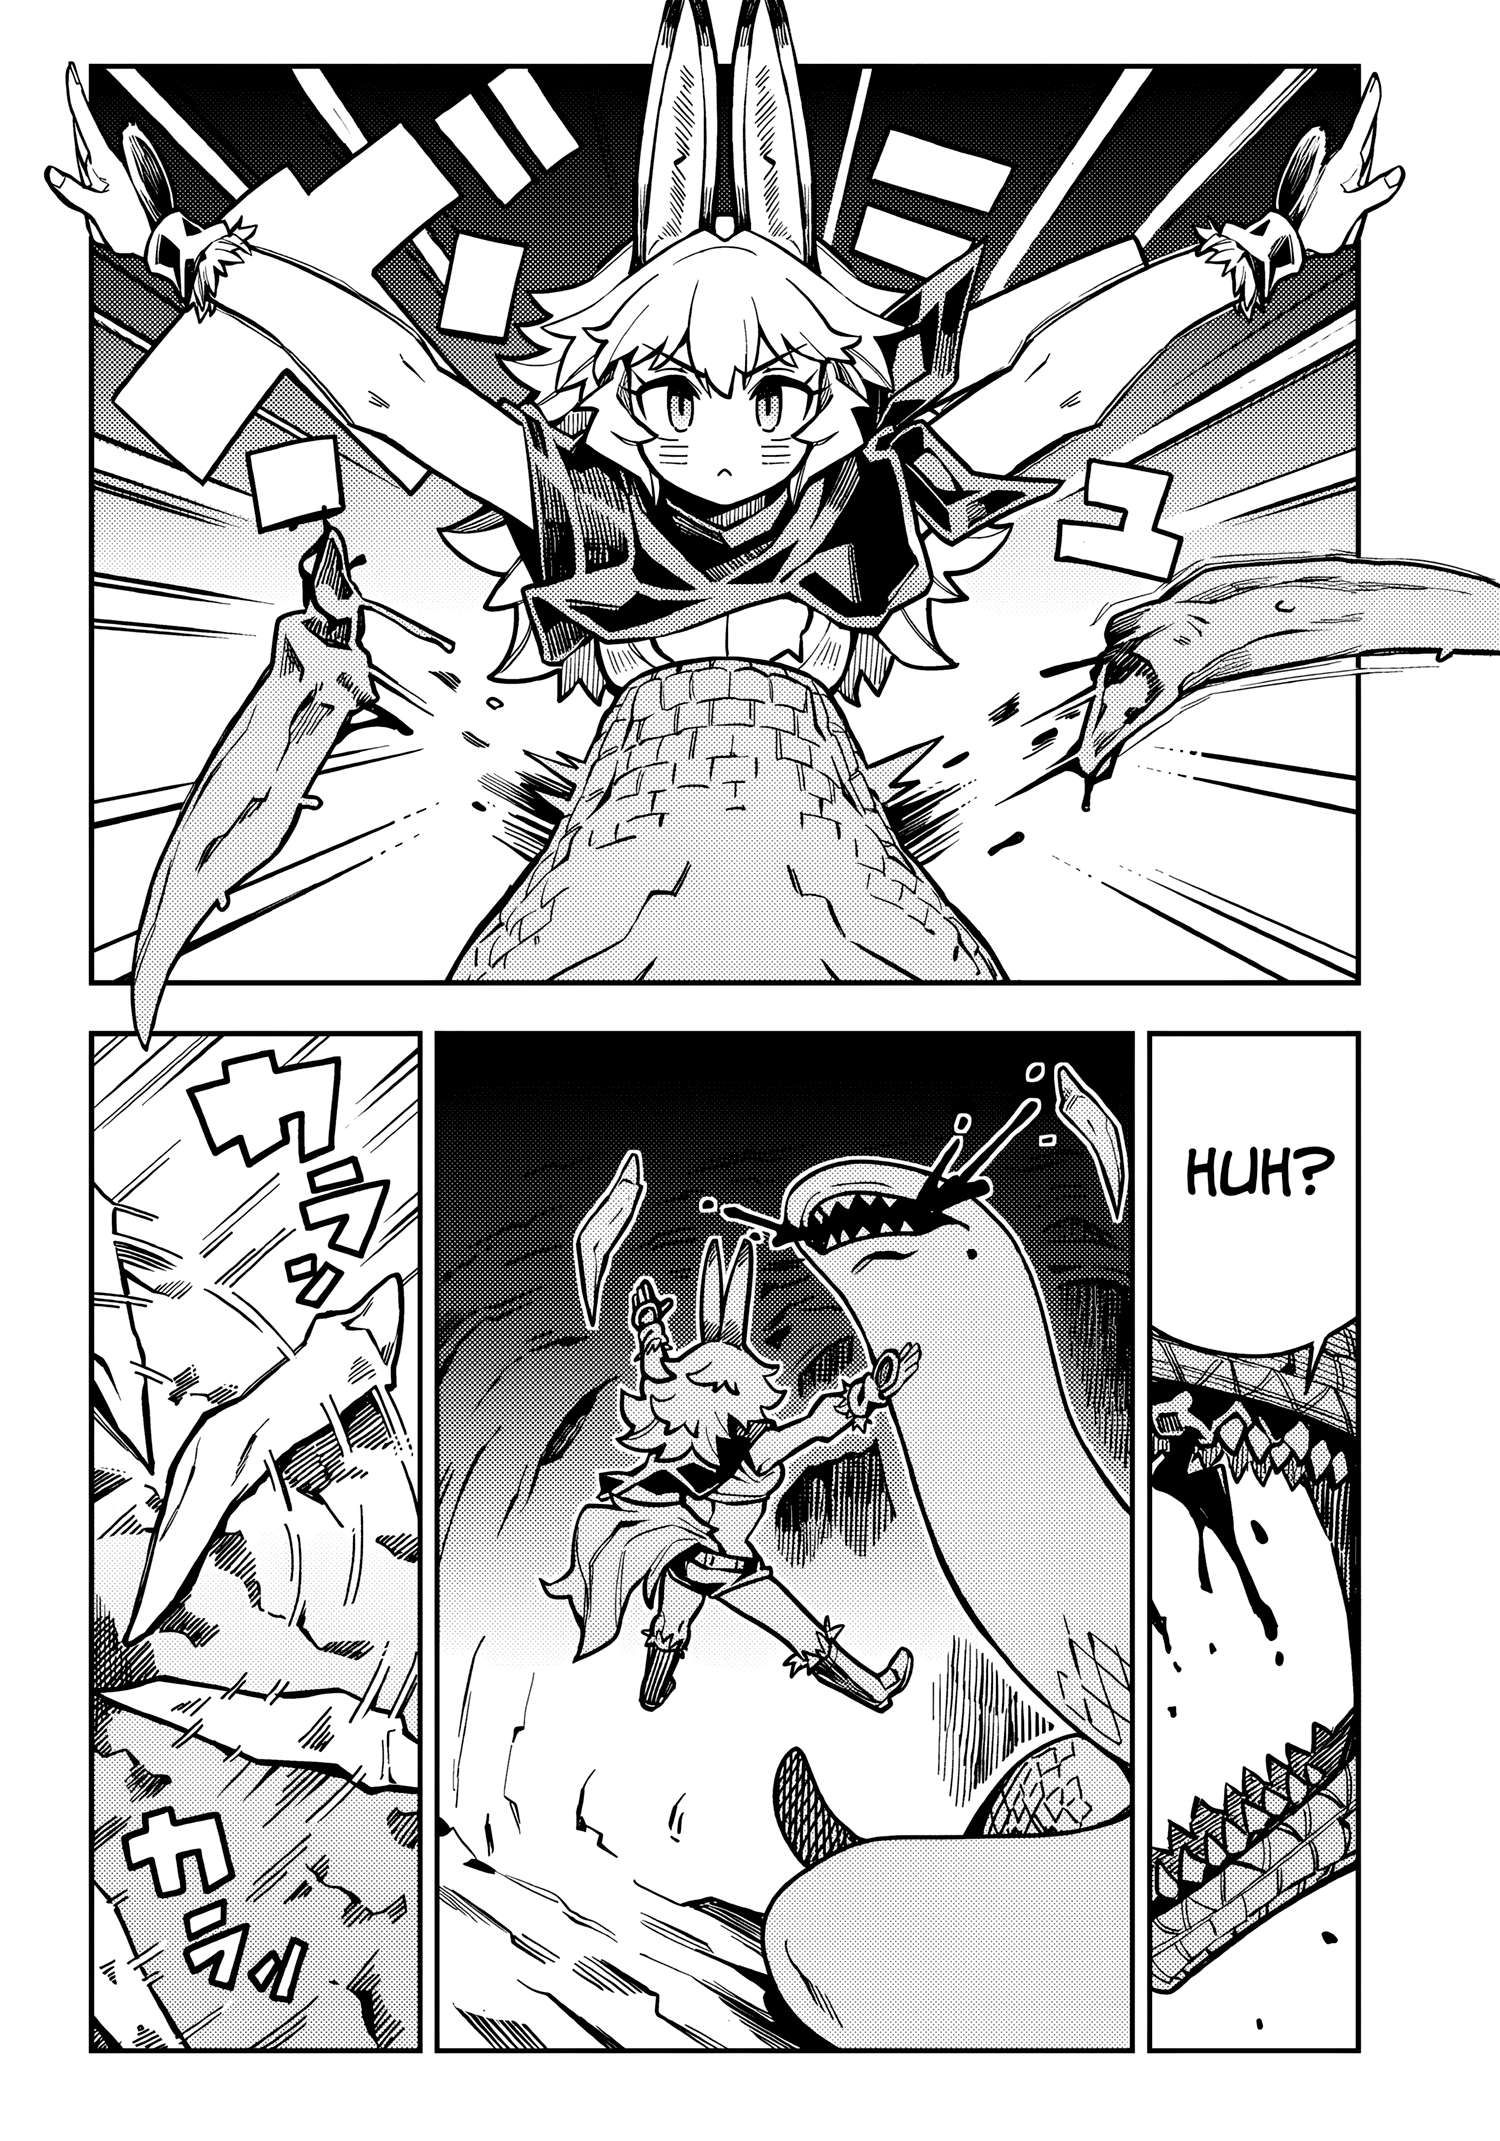 Monmusugo! 〜Living In Another World With The Strongest Monster Girls With Translation Skills〜 chapter 5.3 page 4